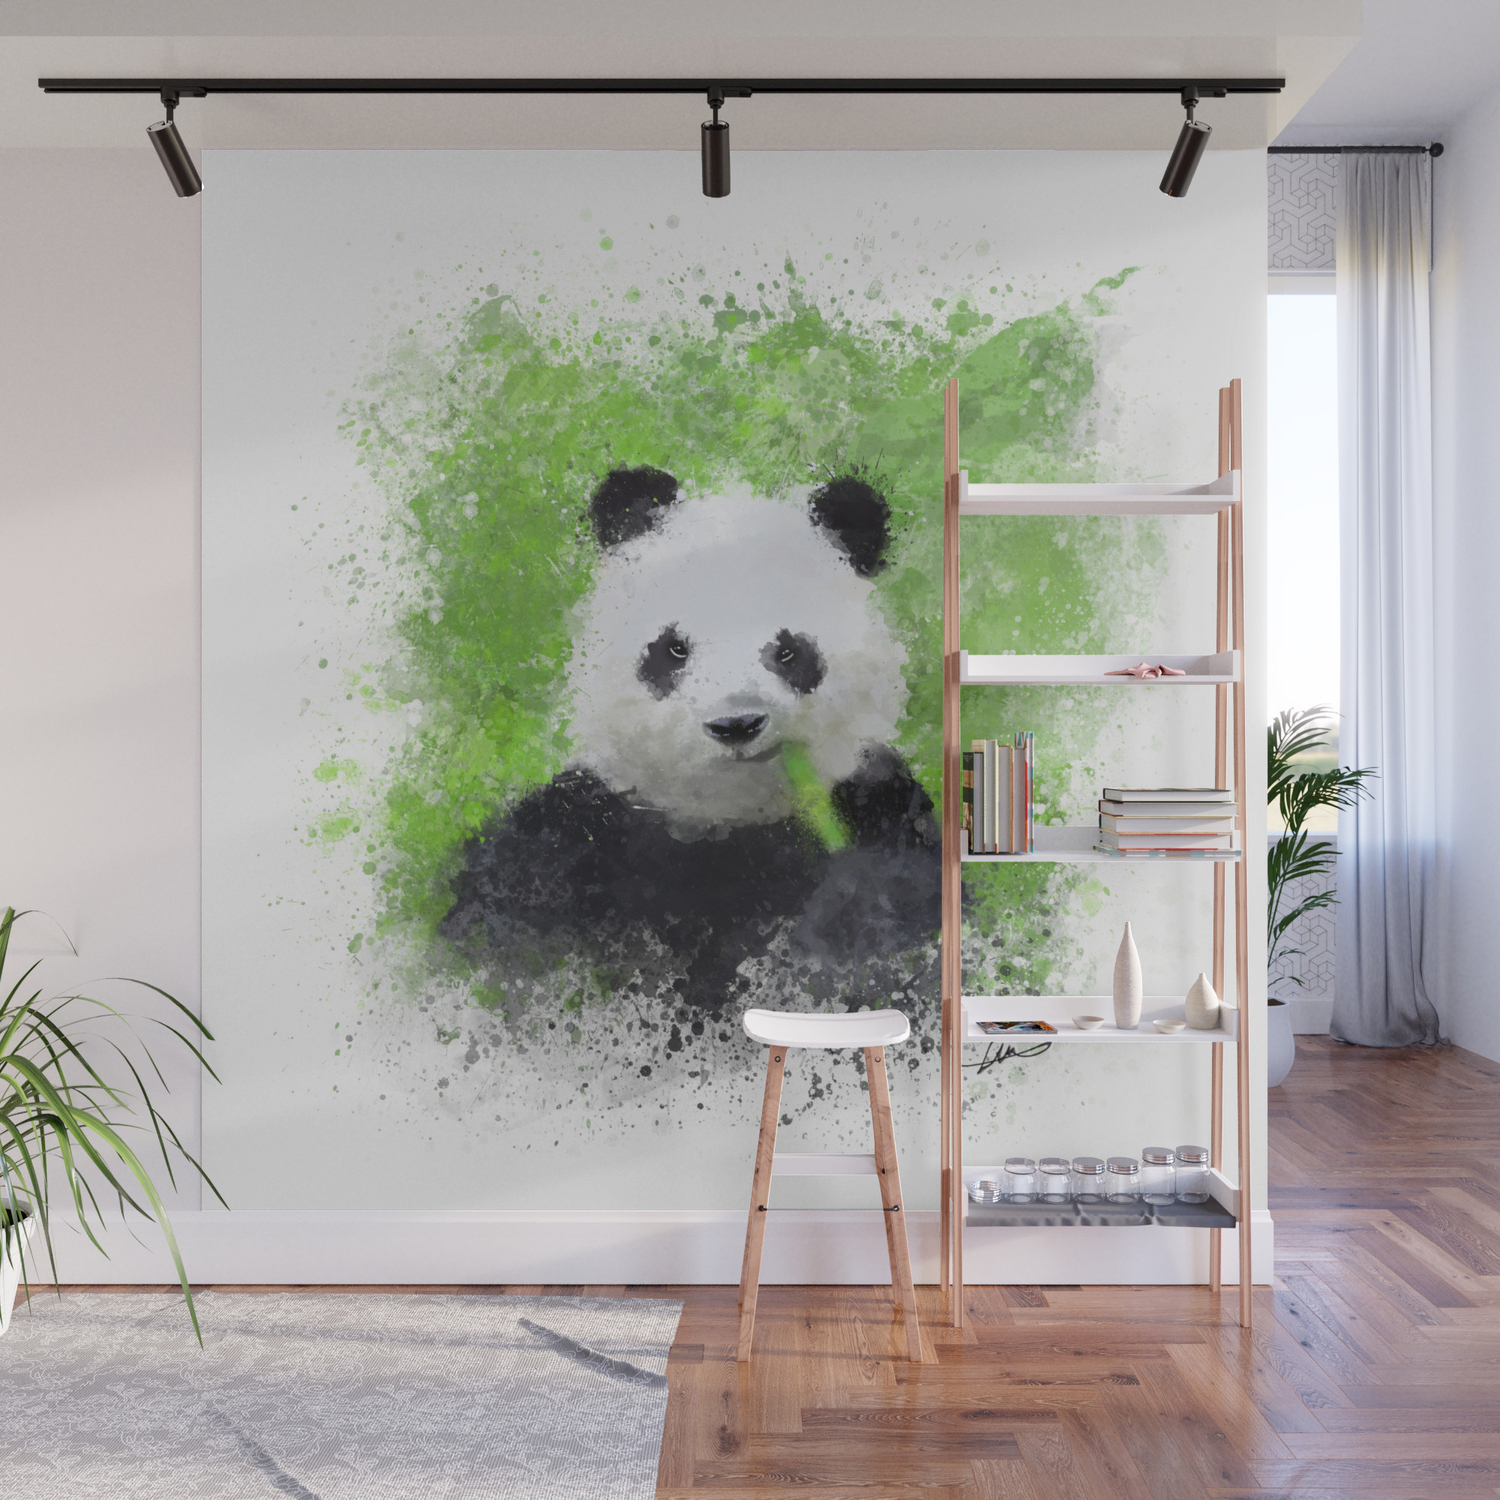 BAMBOO & GIANT PANDAS EATING Wall Art Sticker Mural Decal in 3 x sizes